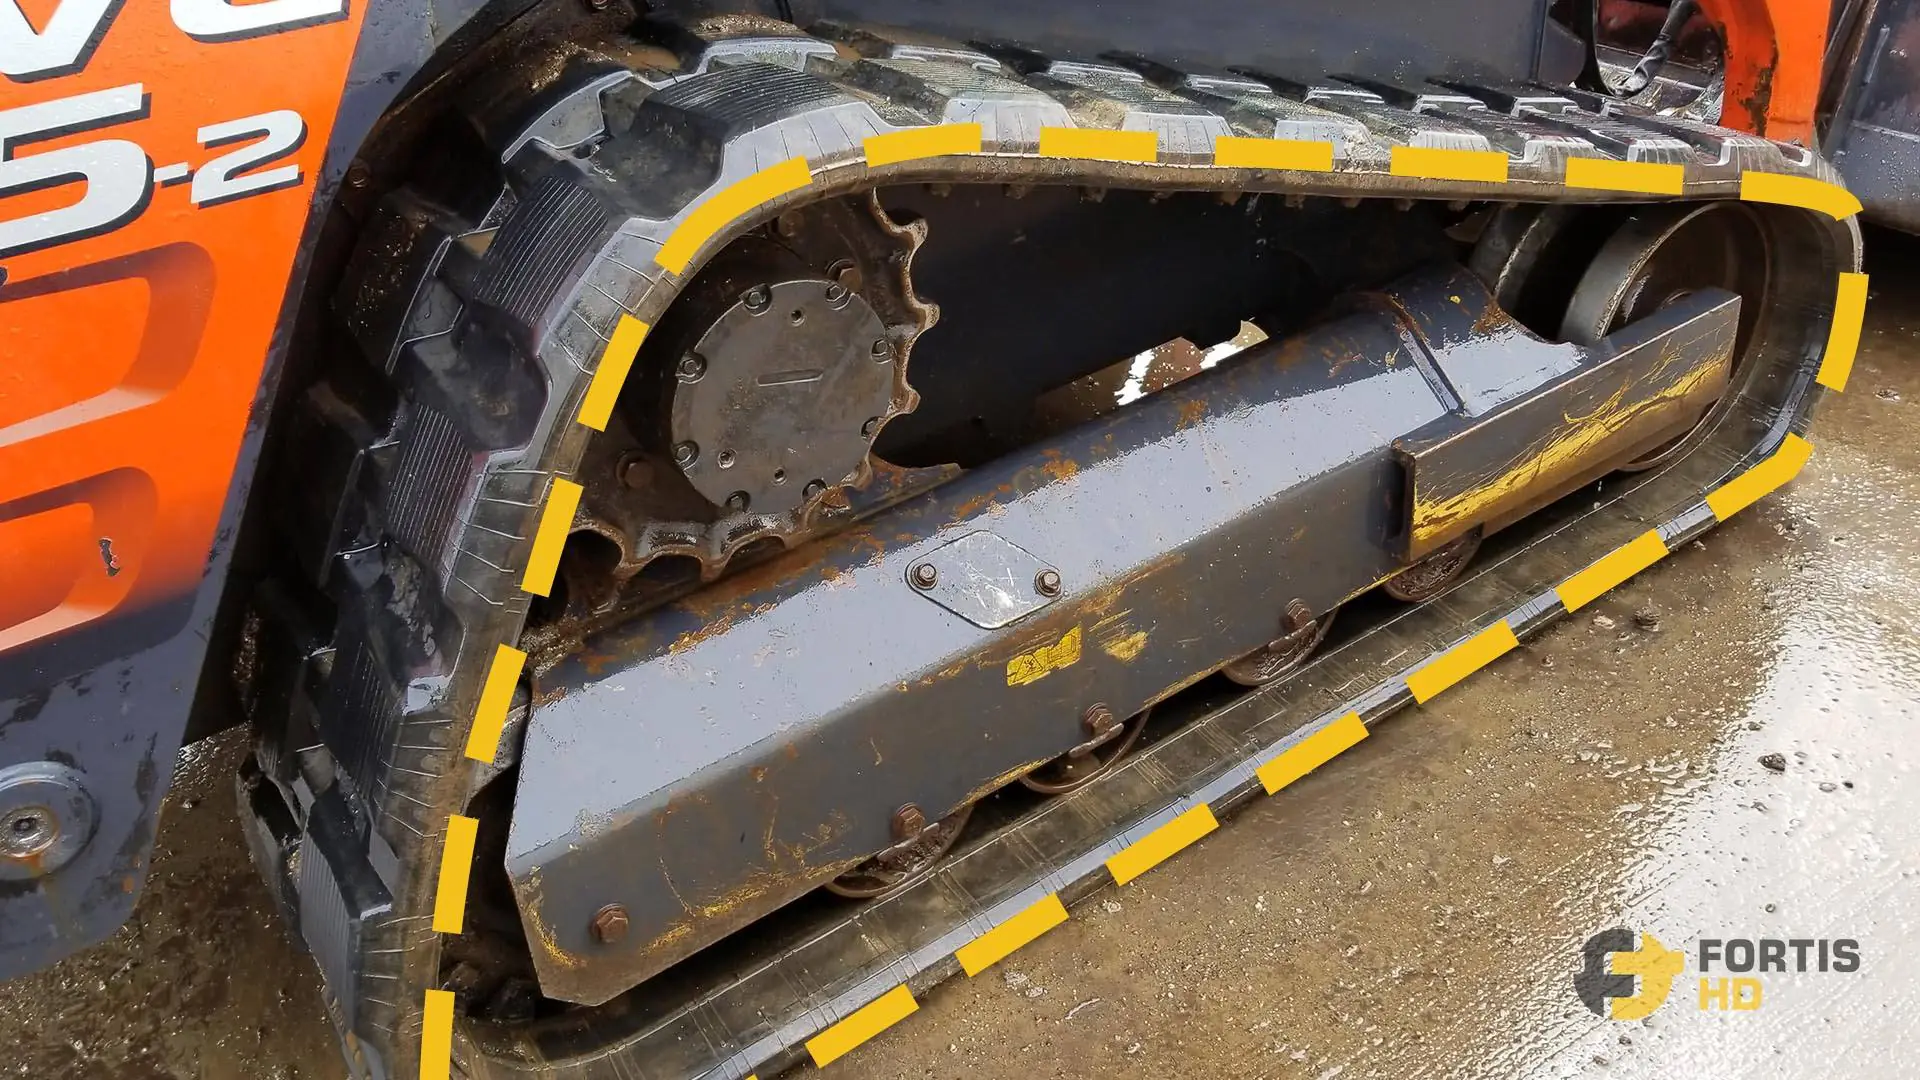 A dashed yellow line highlights the rubber track of an SVL75-2.